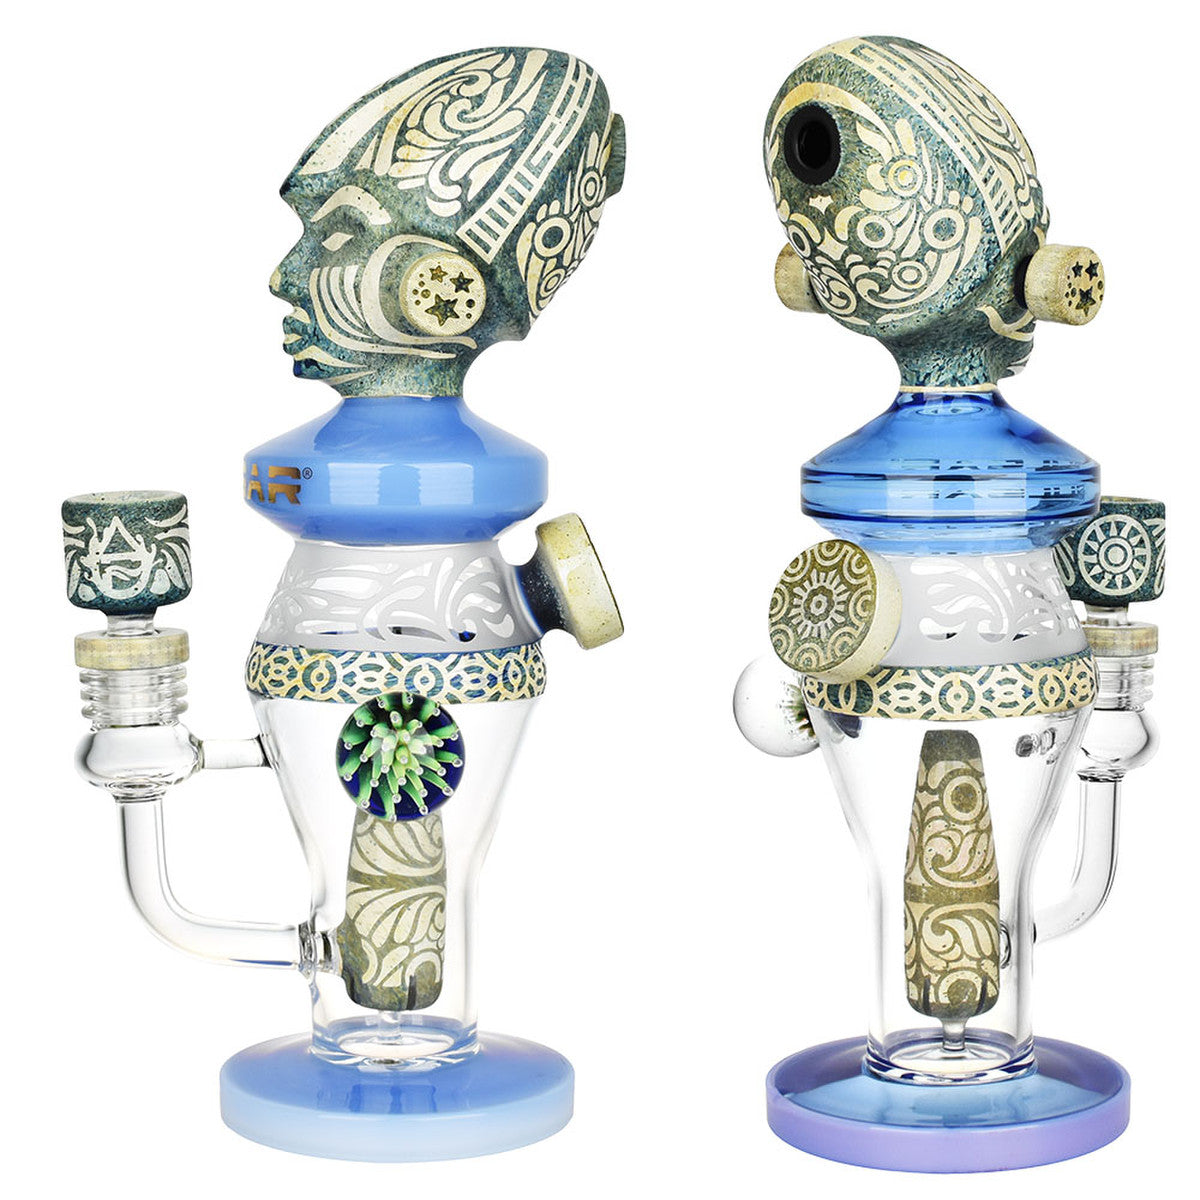 Pulsar Hieroglyph High Priestess Water Pipe with intricate designs, front and side views